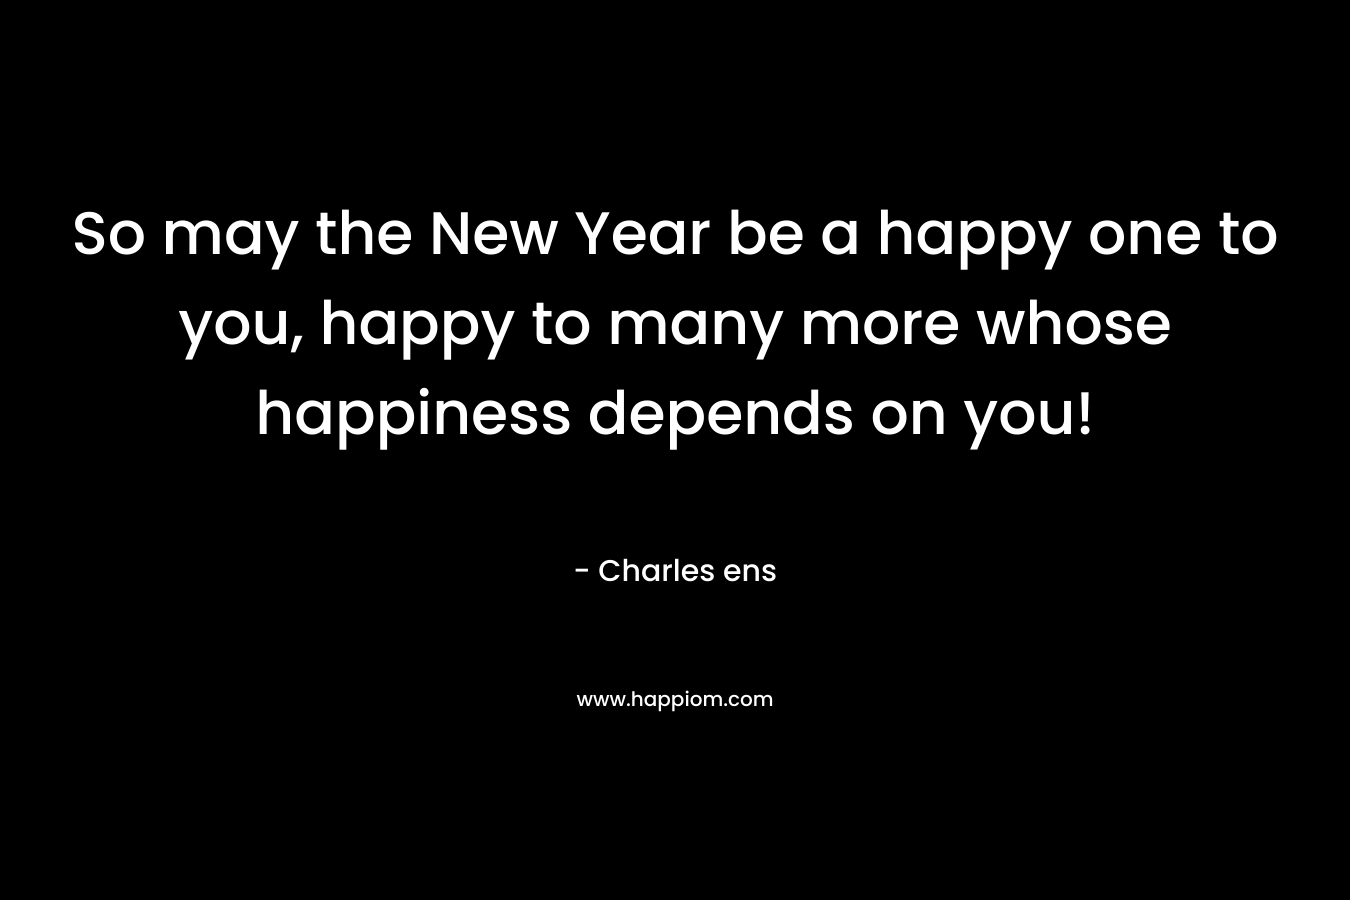 So may the New Year be a happy one to you, happy to many more whose happiness depends on you!